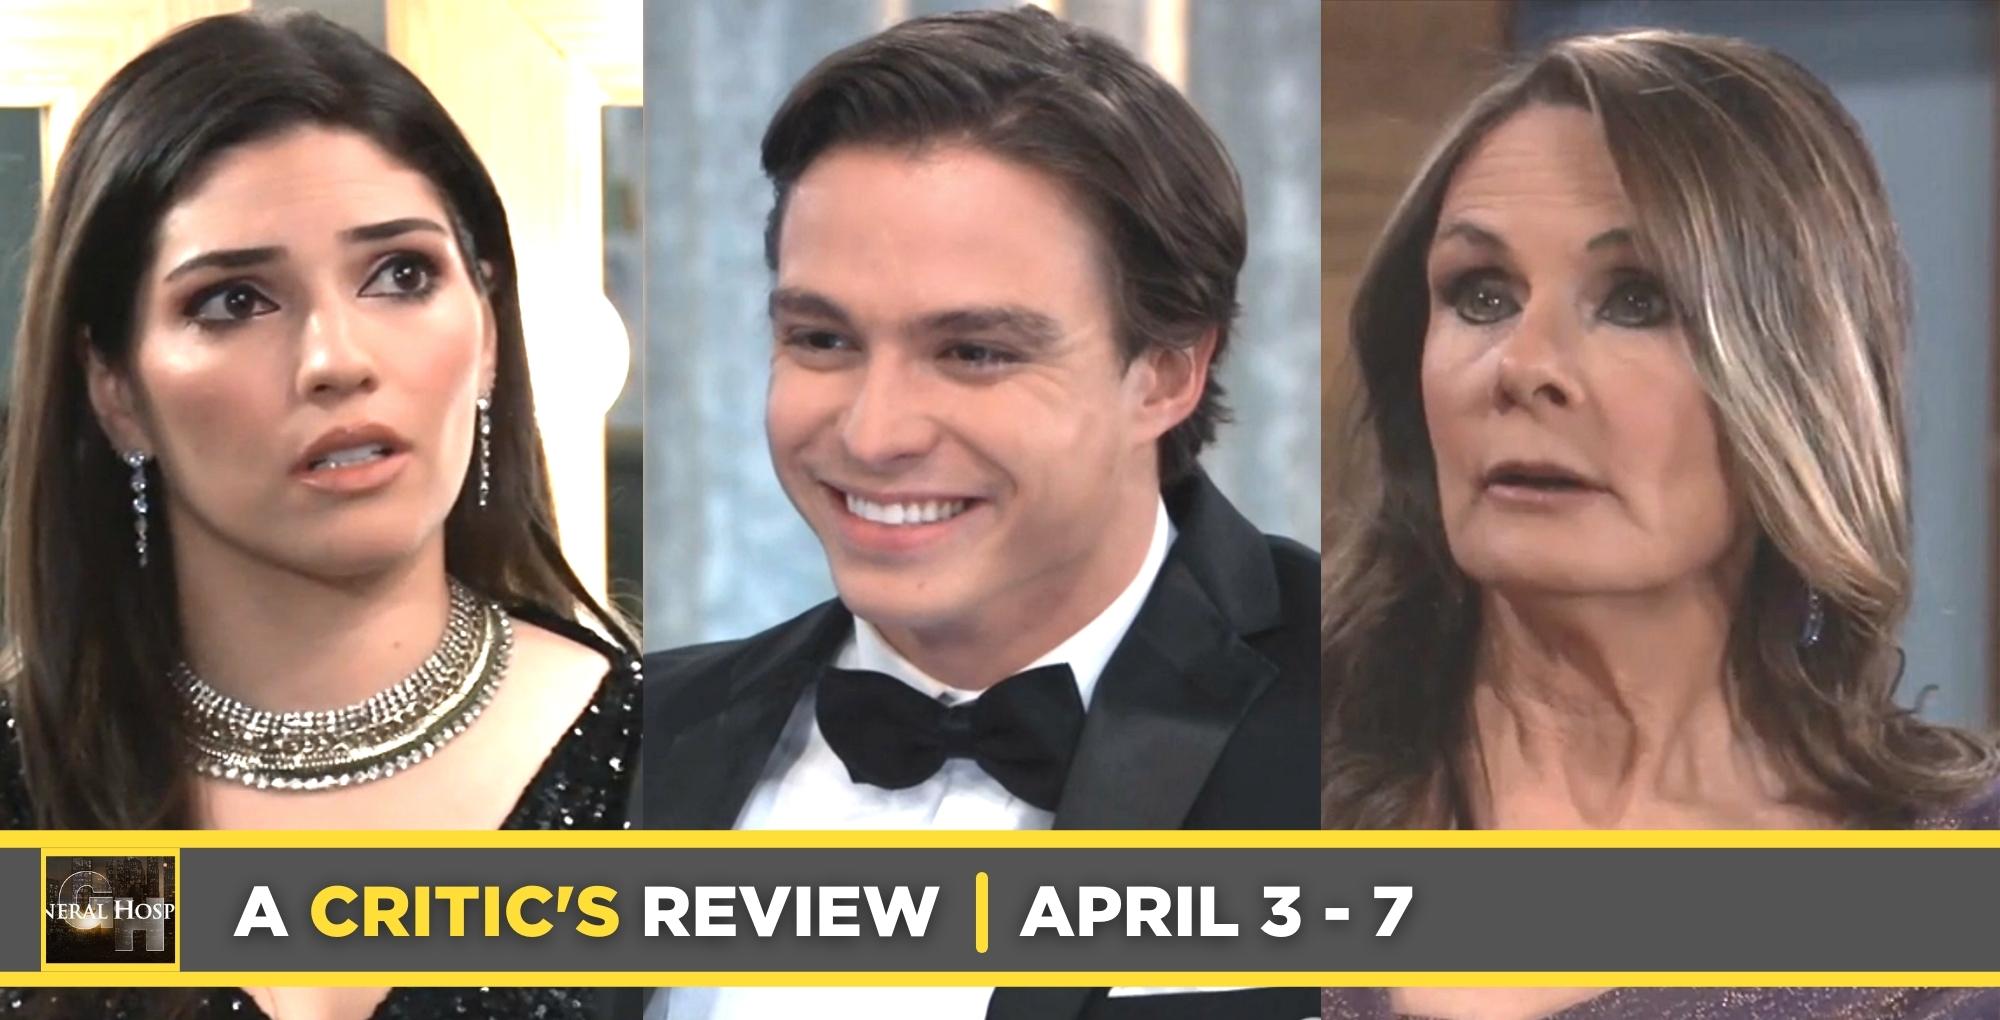 general hospital critic's review for april 3 – april 7, 2023, three images brook lynn, spencer, lucy